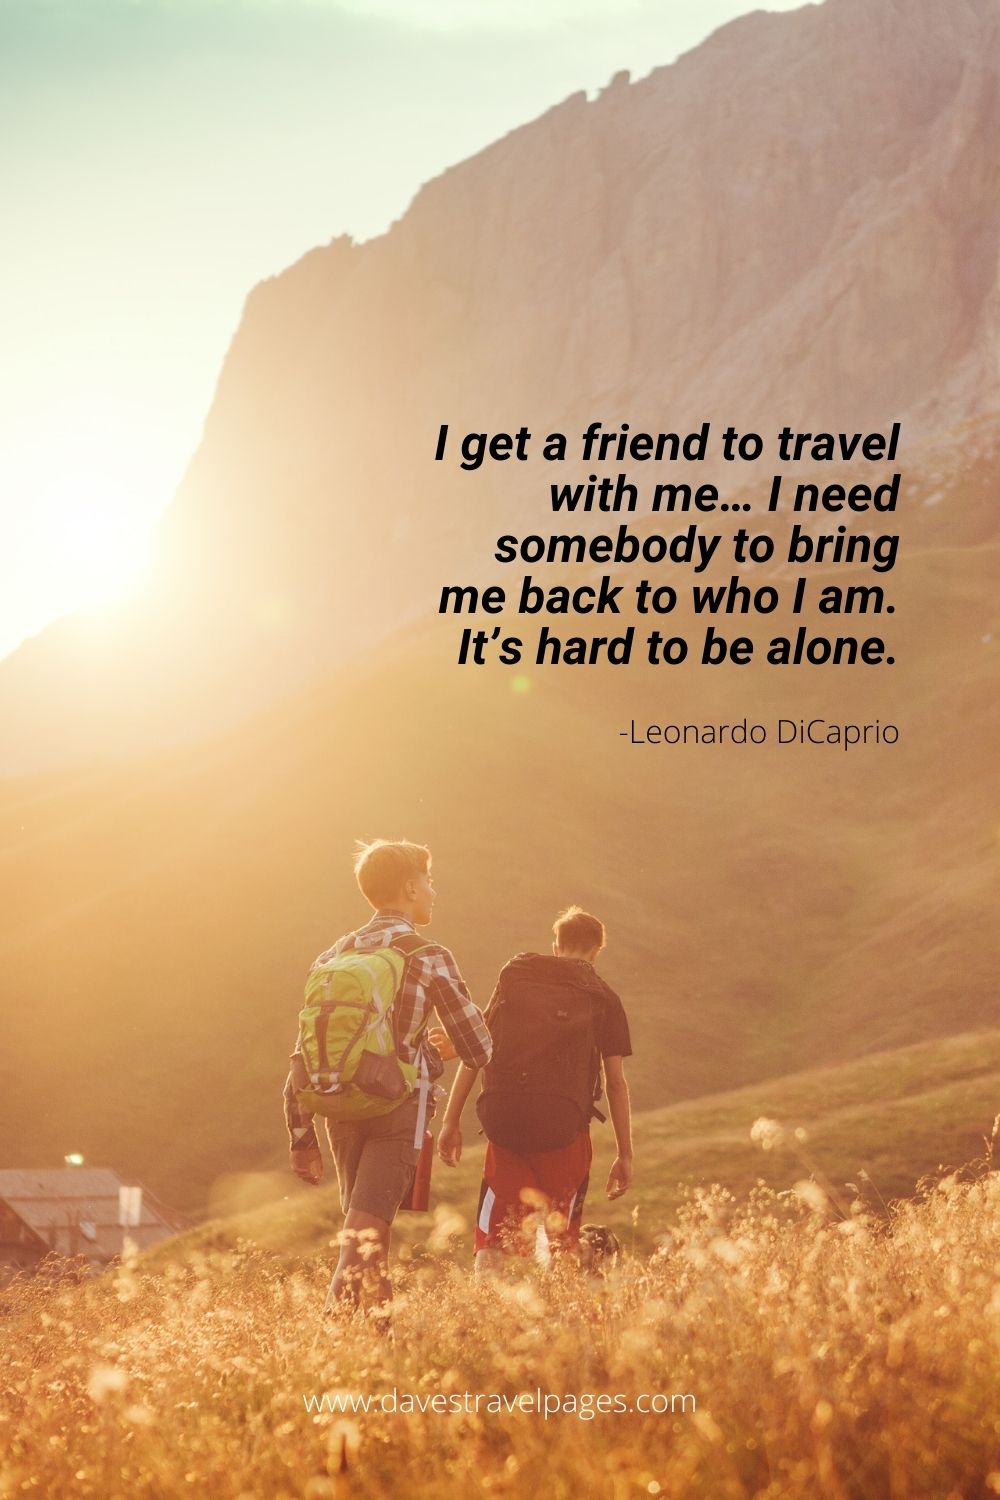 I get a friend to travel with me… I need somebody to bring me back to who I am. It’s hard to be alone.